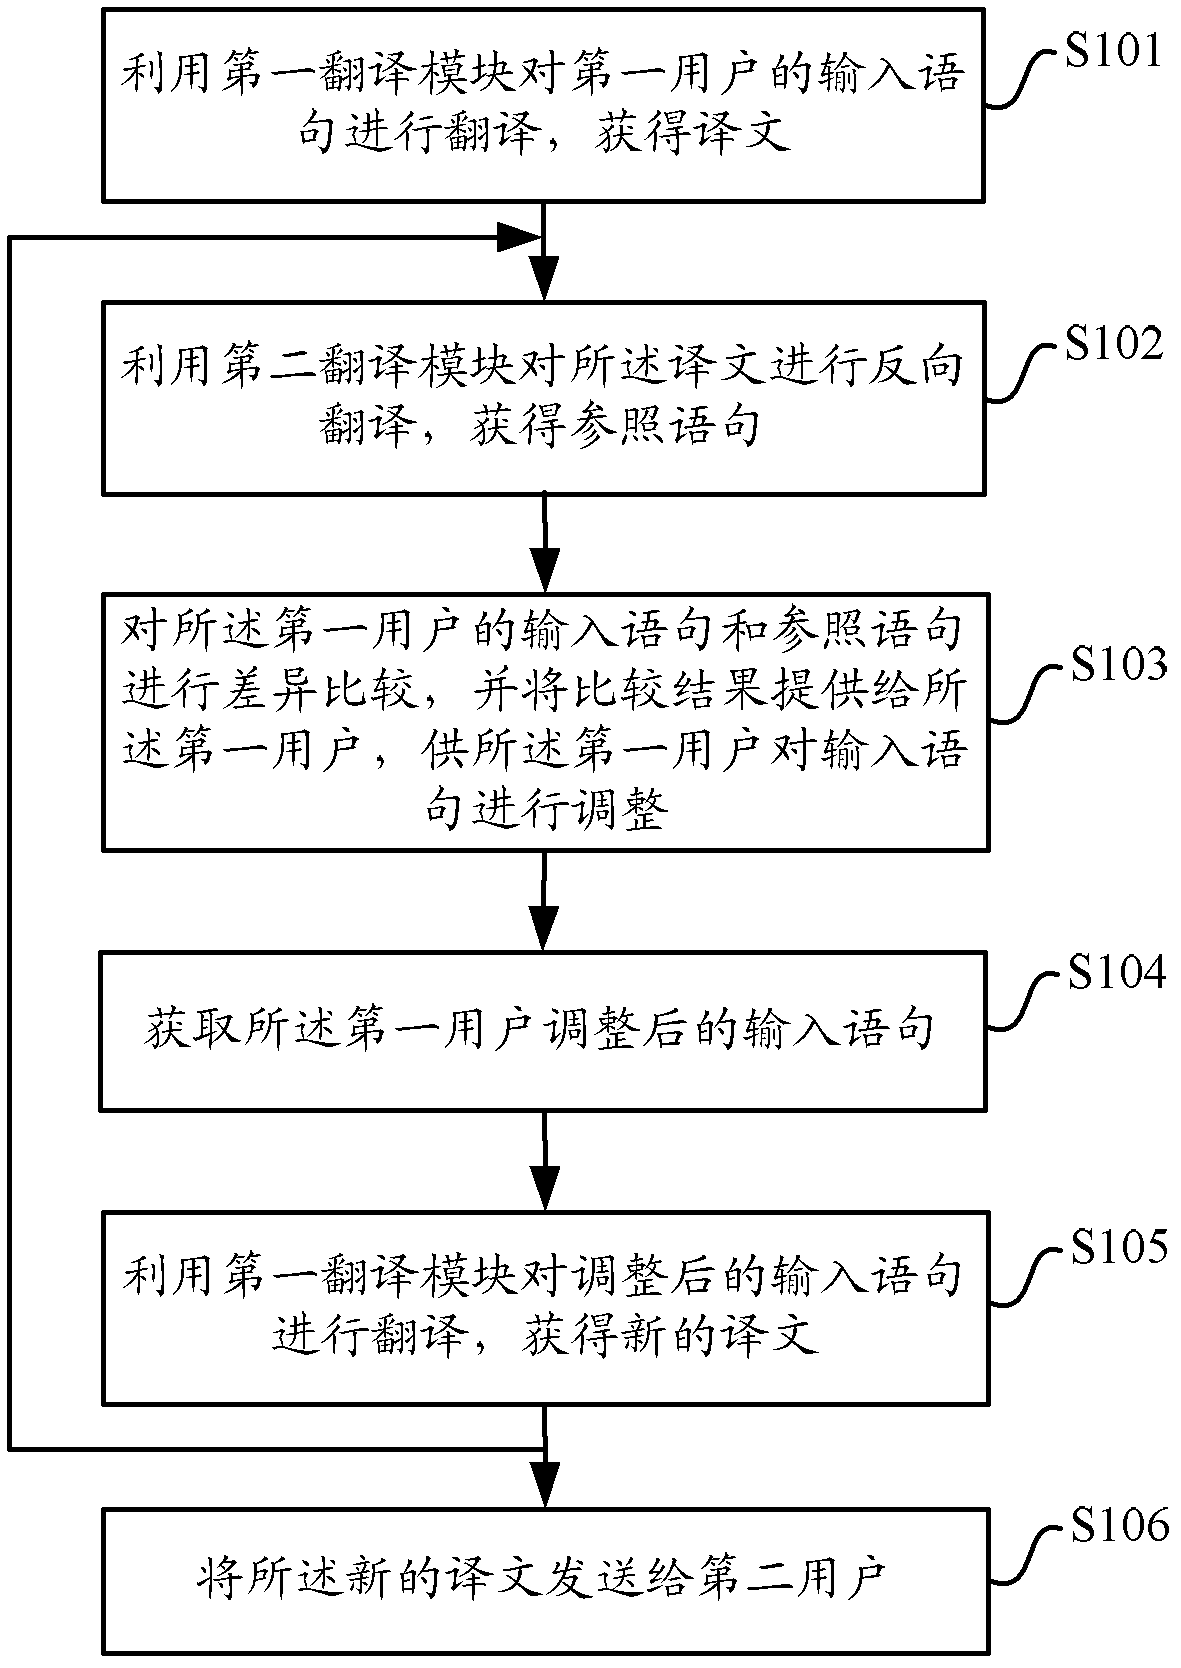 Method and device for proofing translated texts in inter-lingual communication